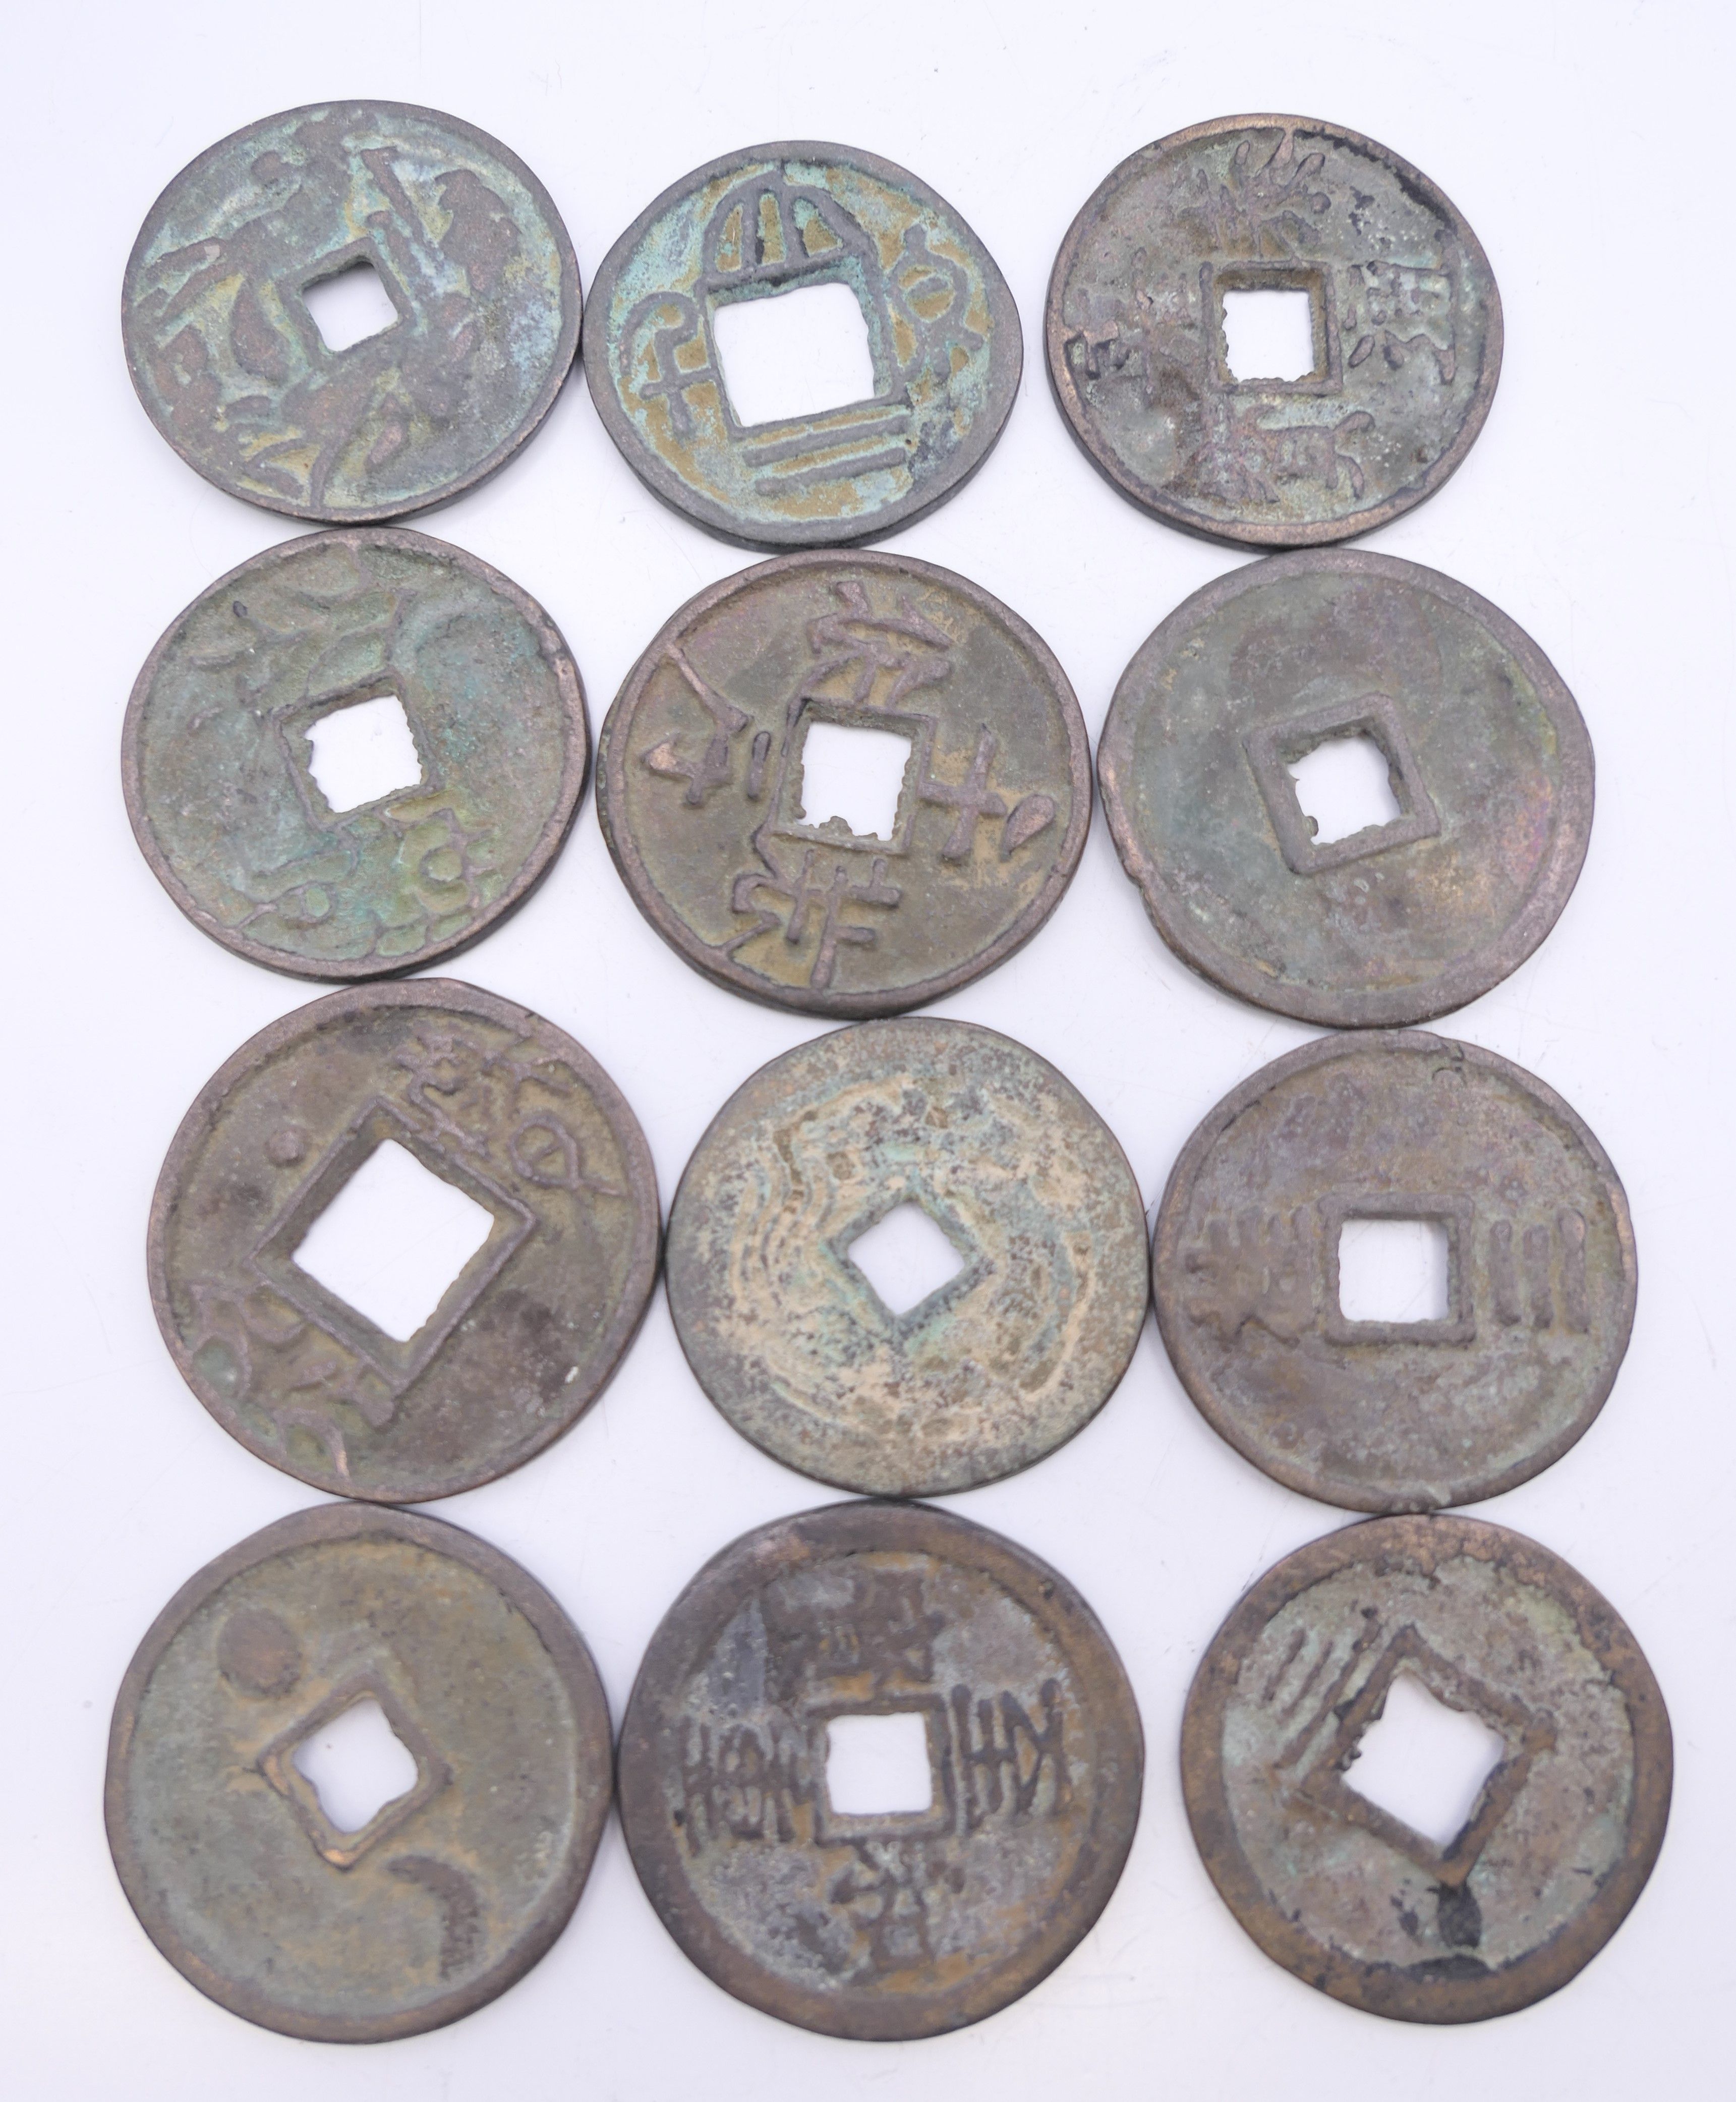 A quantity of Chinese coins. Approximately between 3 cm - 3.5 cm diameter.